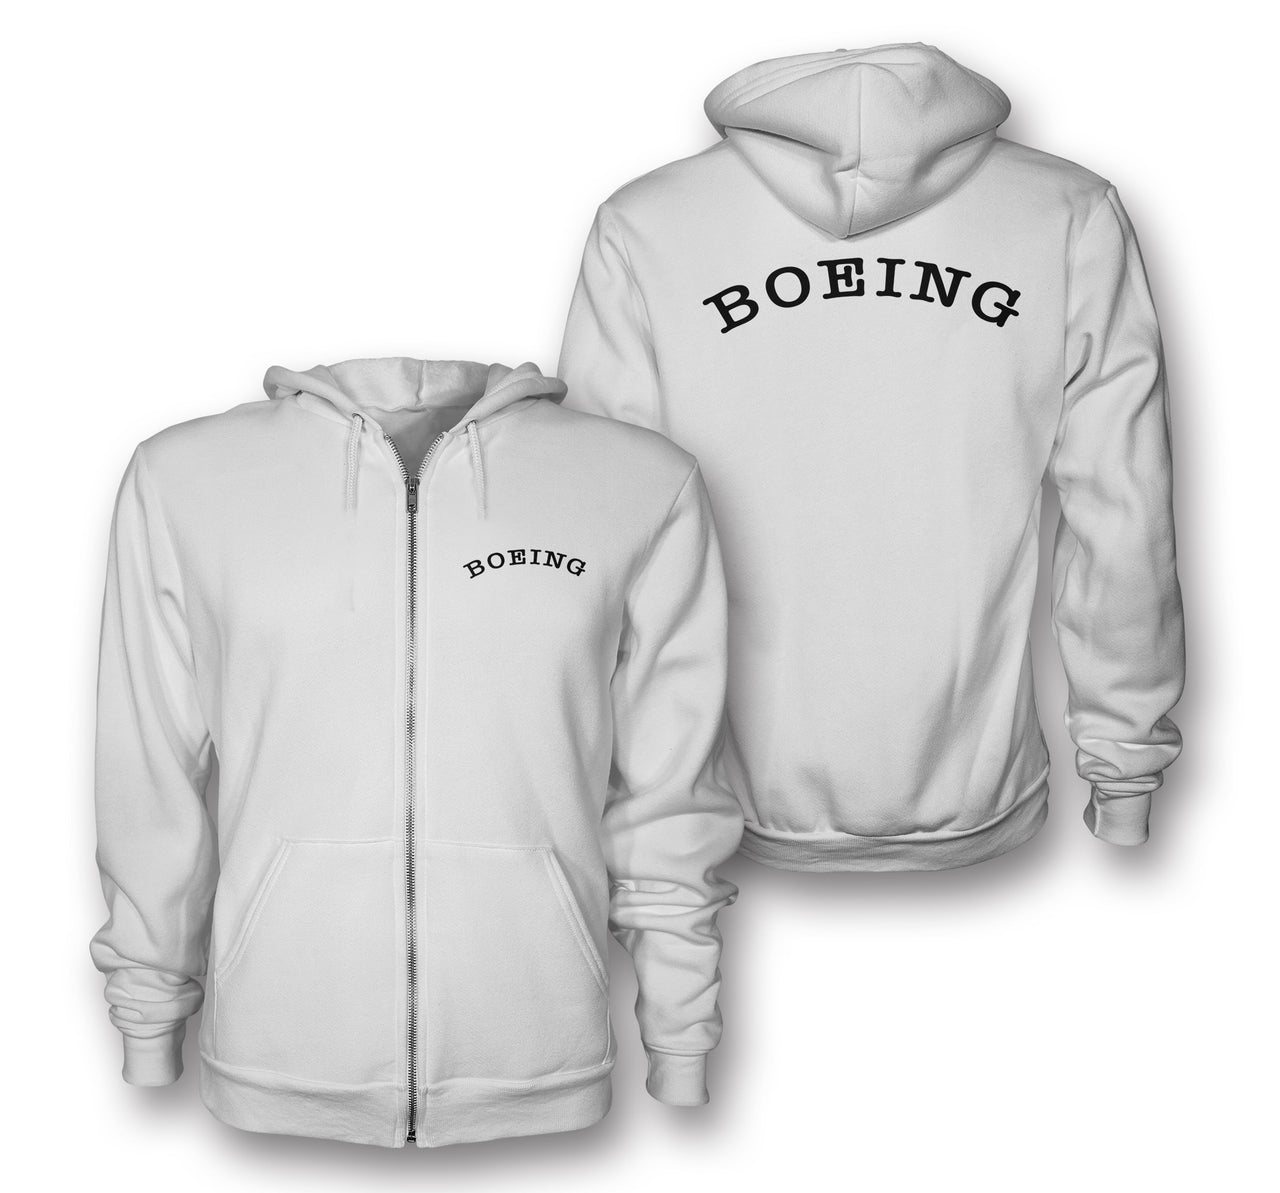 Special BOEING Text Designed Zipped Hoodies